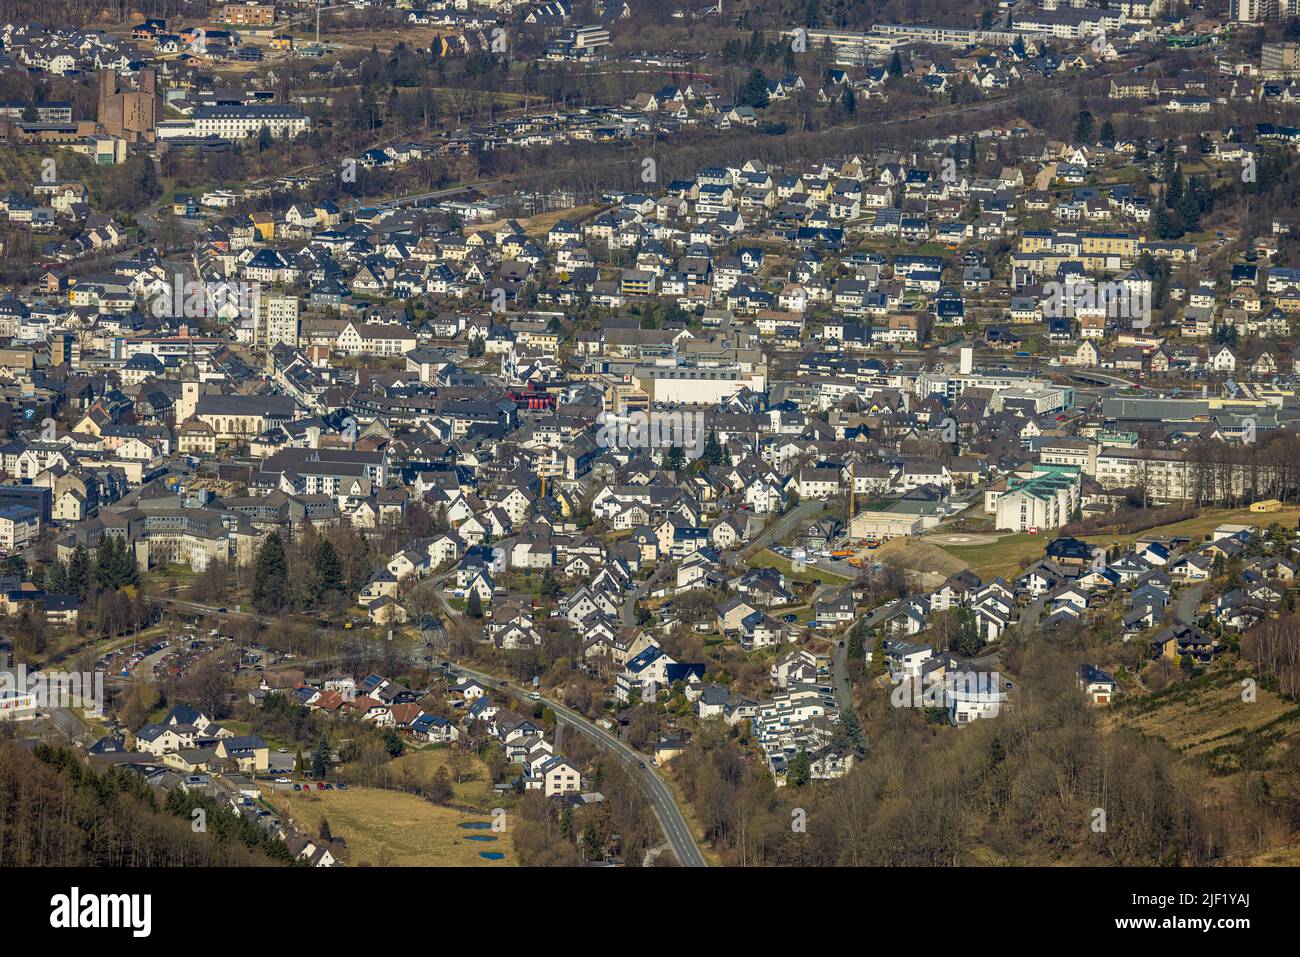 Aerial view, city view, city centre, Meschede, Sauerland, North Rhine-Westphalia, Germany, City, DE, Europe, downtown, aerial photography, aerial view Stock Photo